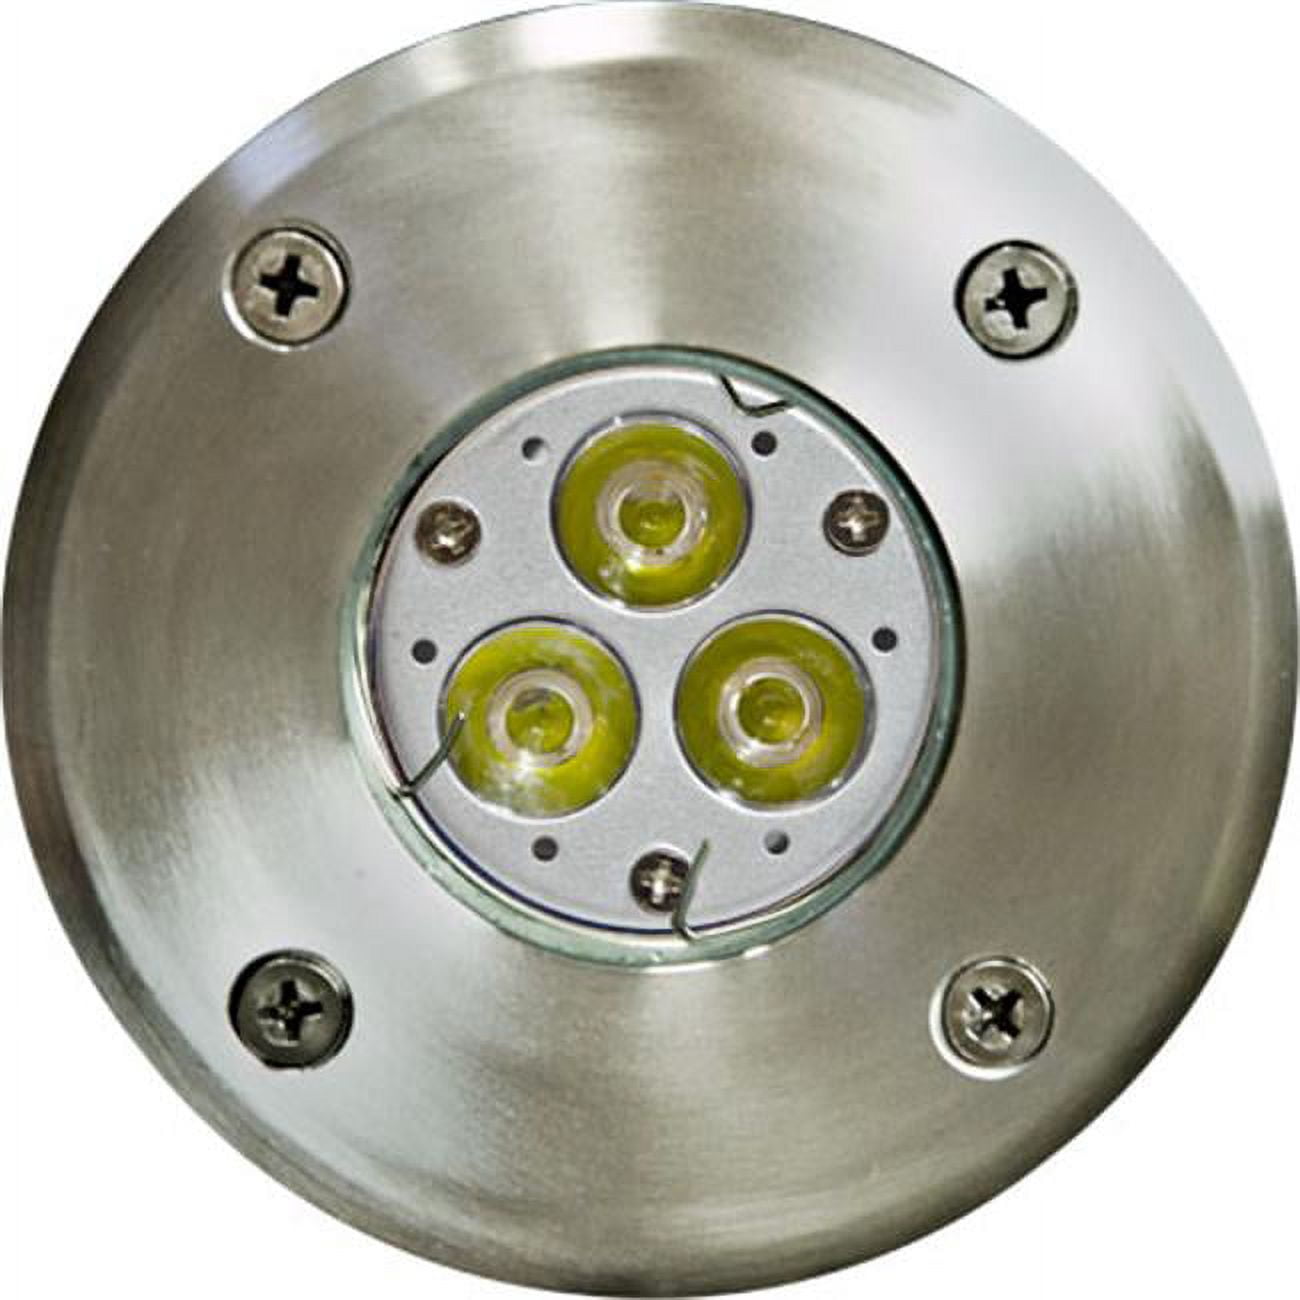 Picture of Dabmar Lighting LV314-LED3-SS Stainless Steel LED In-Ground Well Light, Stainless Steel - 5.97 x 4.36 x 4.36 in.